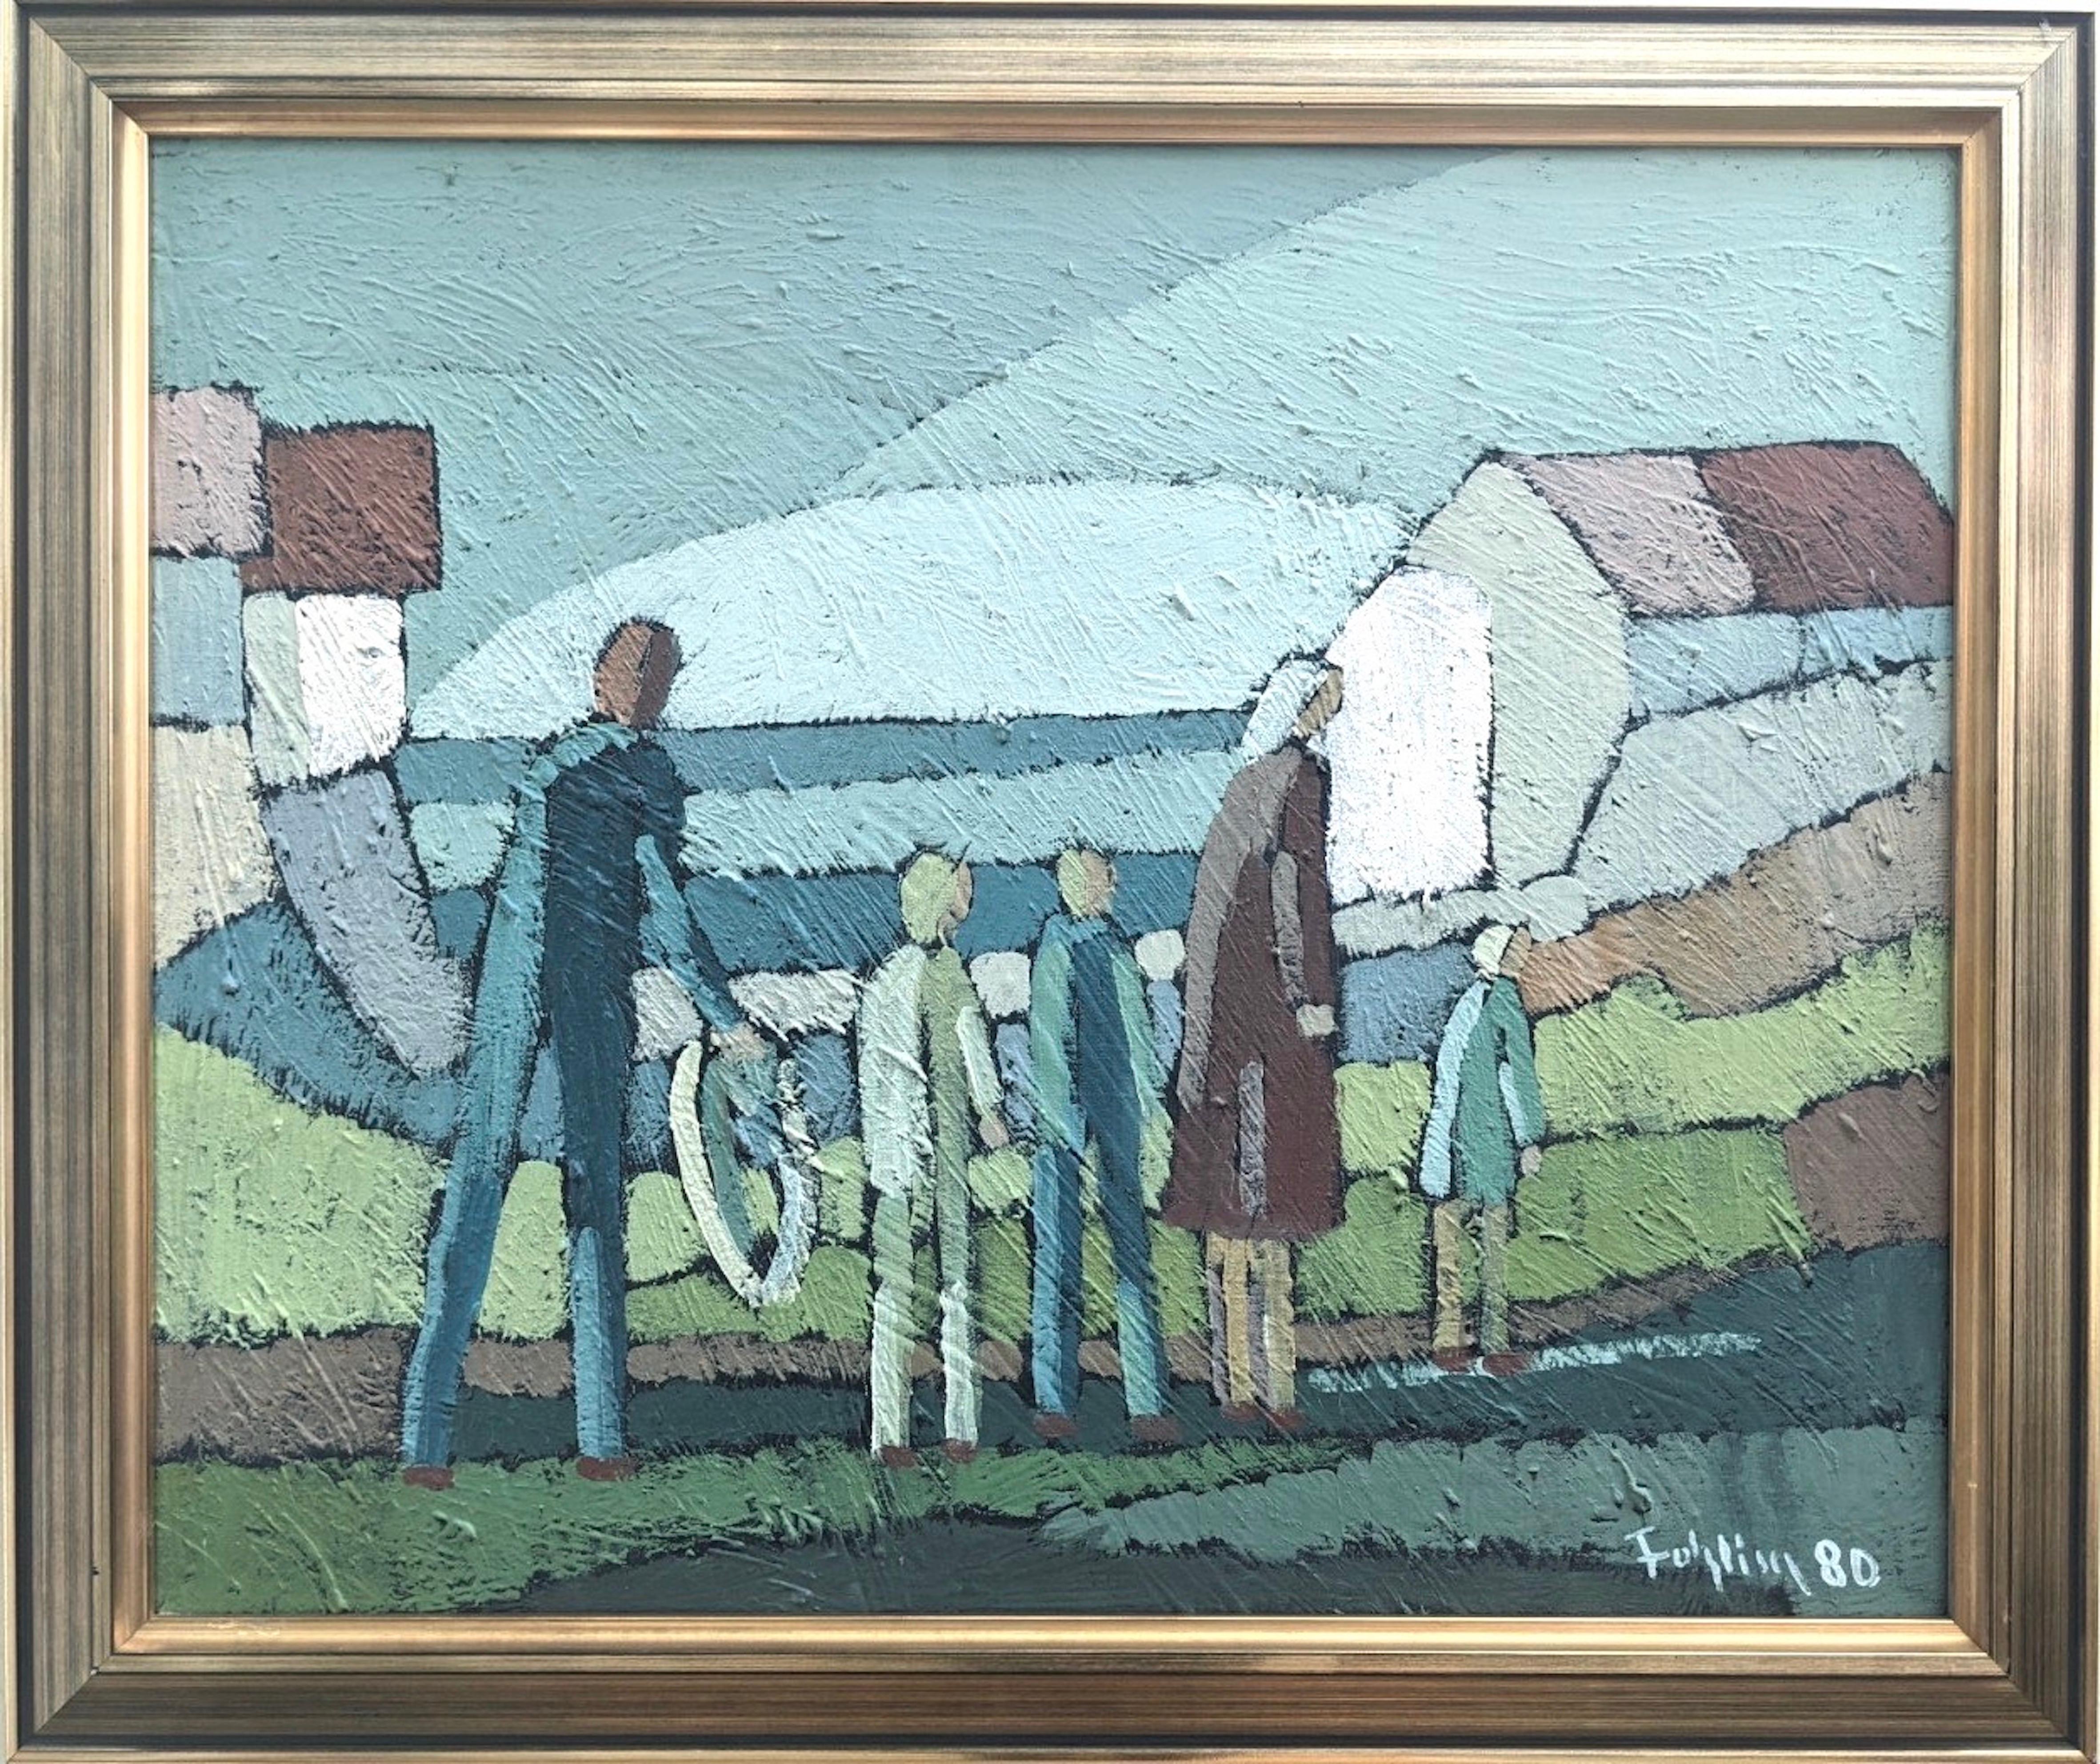 Unknown Figurative Painting - 1980 Vintage Swedish Figurative Framed Oil Painting - Family